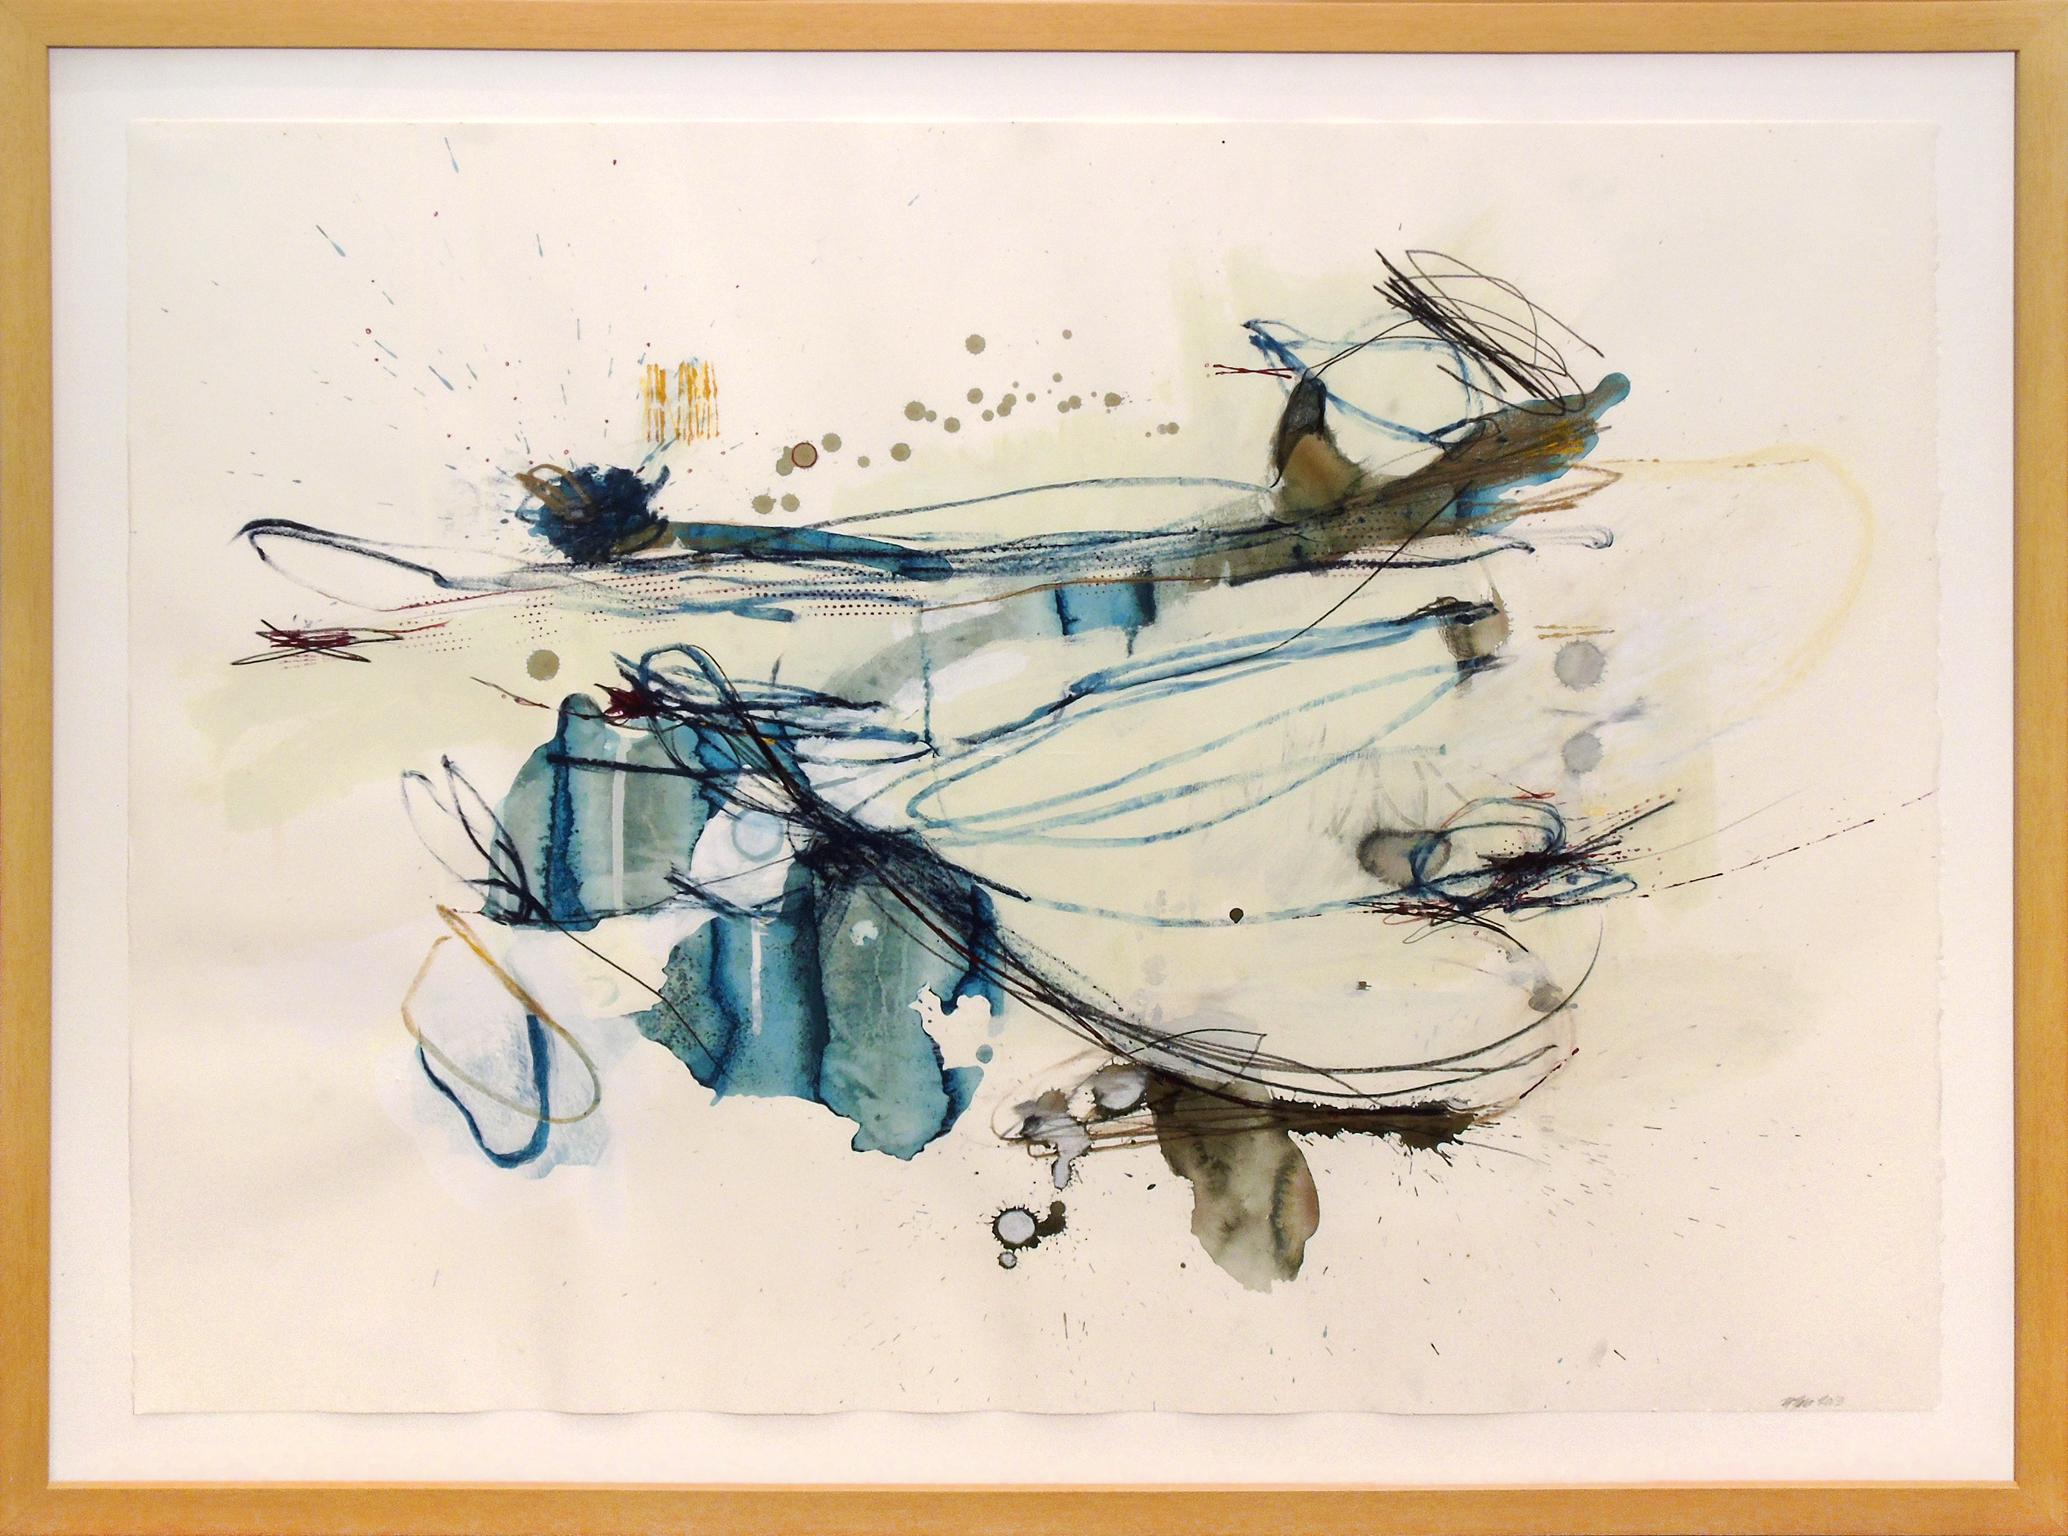 "Low Growing Fruit", a one of a kind abstract work on paper by Melissa Zarem, combines a variety of marks, washes and drips. It is dominated by teal, black and white space. As is characteristic in Zarem's work, several drawing and painting